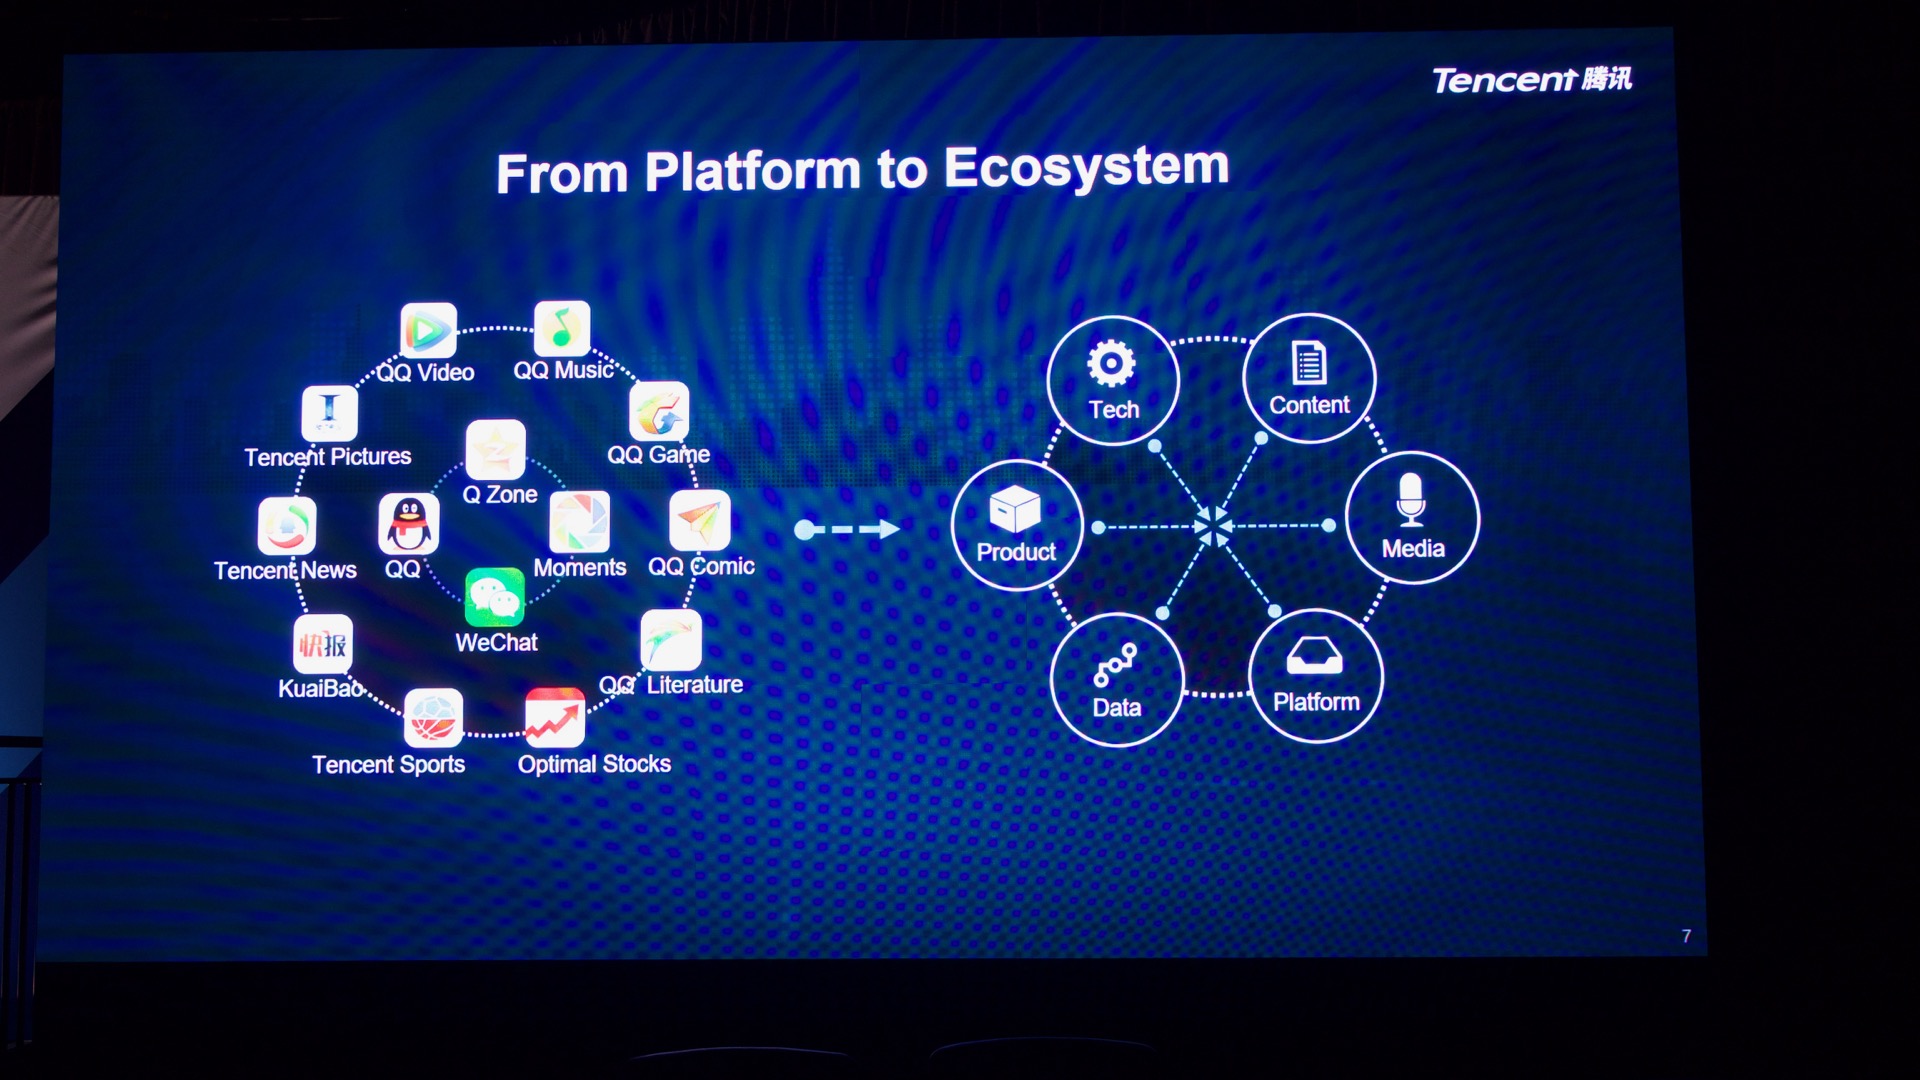 Tencent - From platform to ecosystem